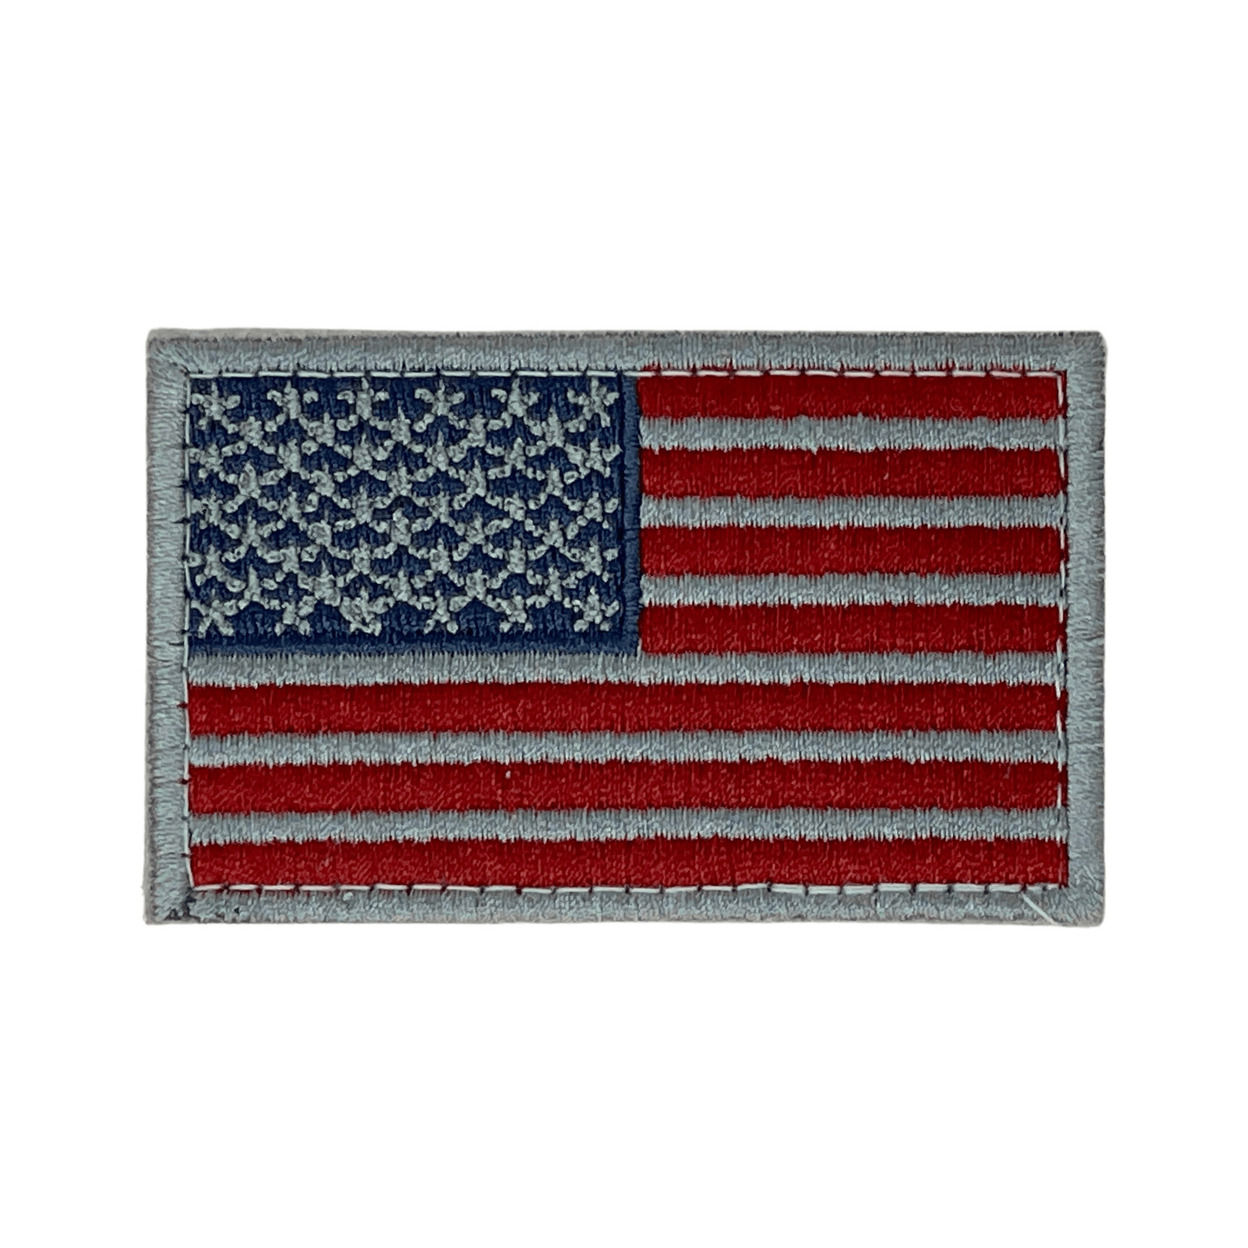 Tactical USA Flag Patch With Detachable Backing - Yellow Red White & Blue